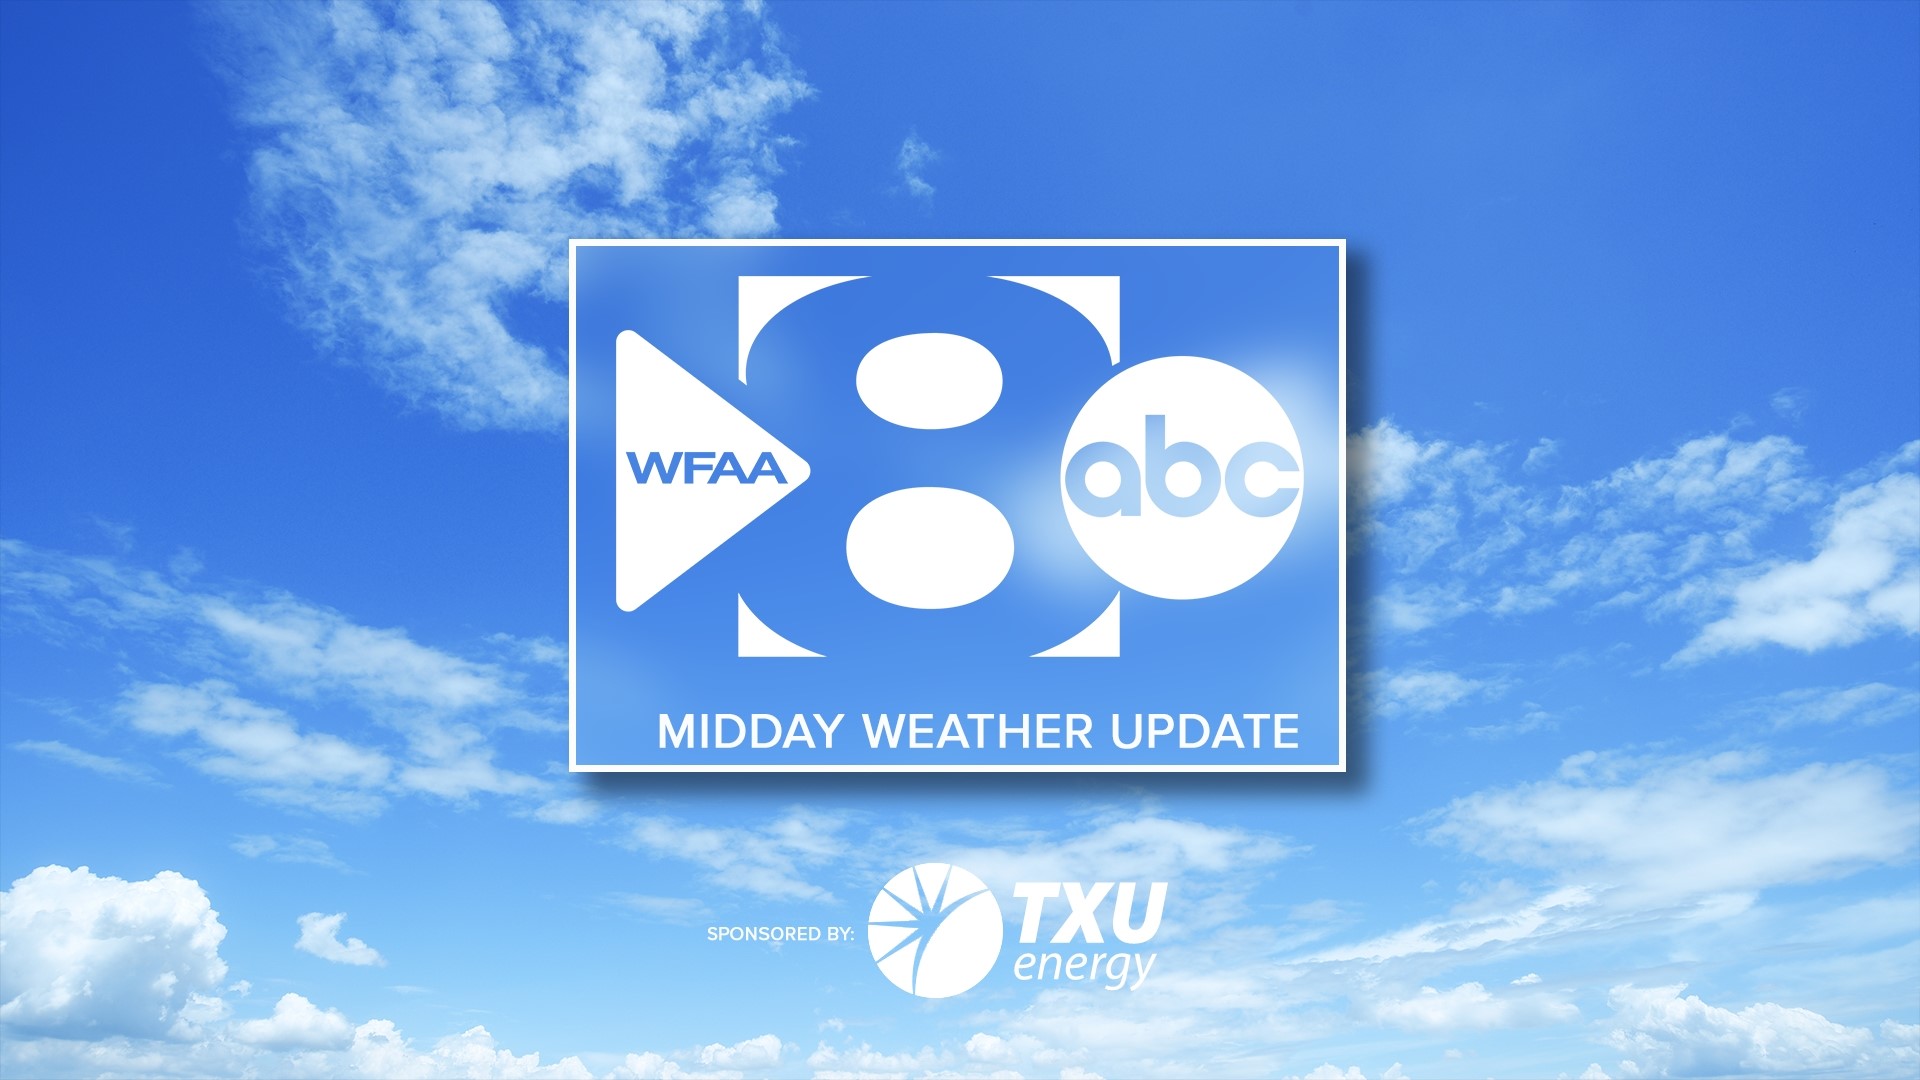 DFW Weather: Sept. 22 midday forecast update